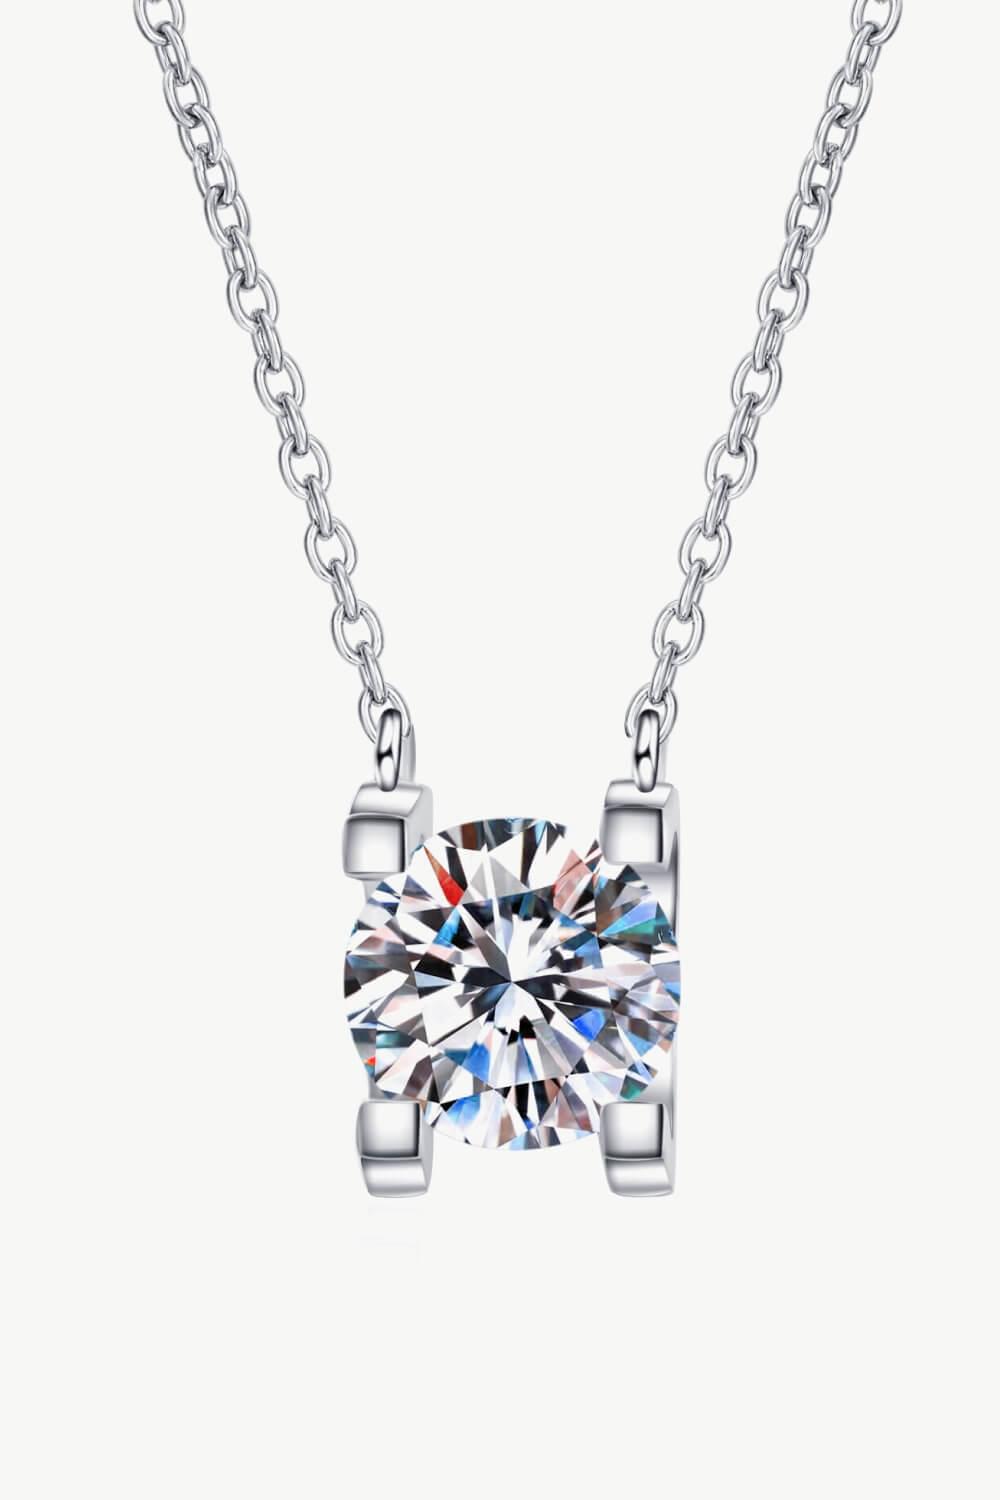 1 Carat Moissanite Chain Necklace - Necklaces - FITGGINS